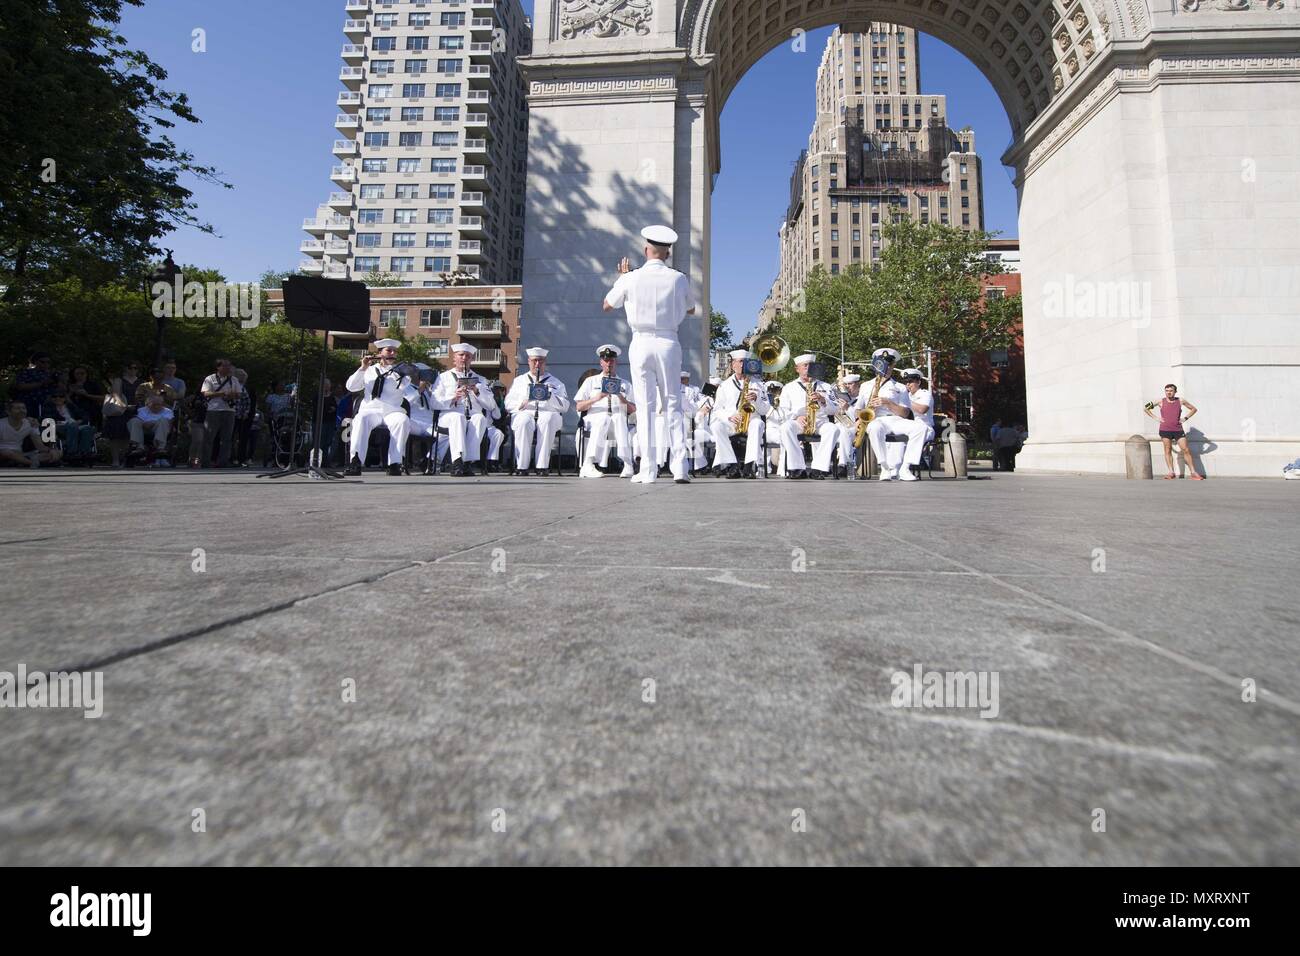 180524-N-BY095-0293 NEW YORK (May 24, 2018) Navy Band Northeast performs at Washington Square Park during Fleet Week New York (FWNY), May 24, 2018. Now in its 30th year FWNY is the city's time-honored celebration of the sea services. It is an unparalleled opportunity for the citizens of New York and the surrounding tri-state area to meet Sailors, Marines and Coast Guardsmen, as well as witness firsthand the latest capabilities of today's maritime services. (U.S. Navy photo by Mass Communication Specialist 3rd Class Maria I. Alvarez/Released). () Stock Photo